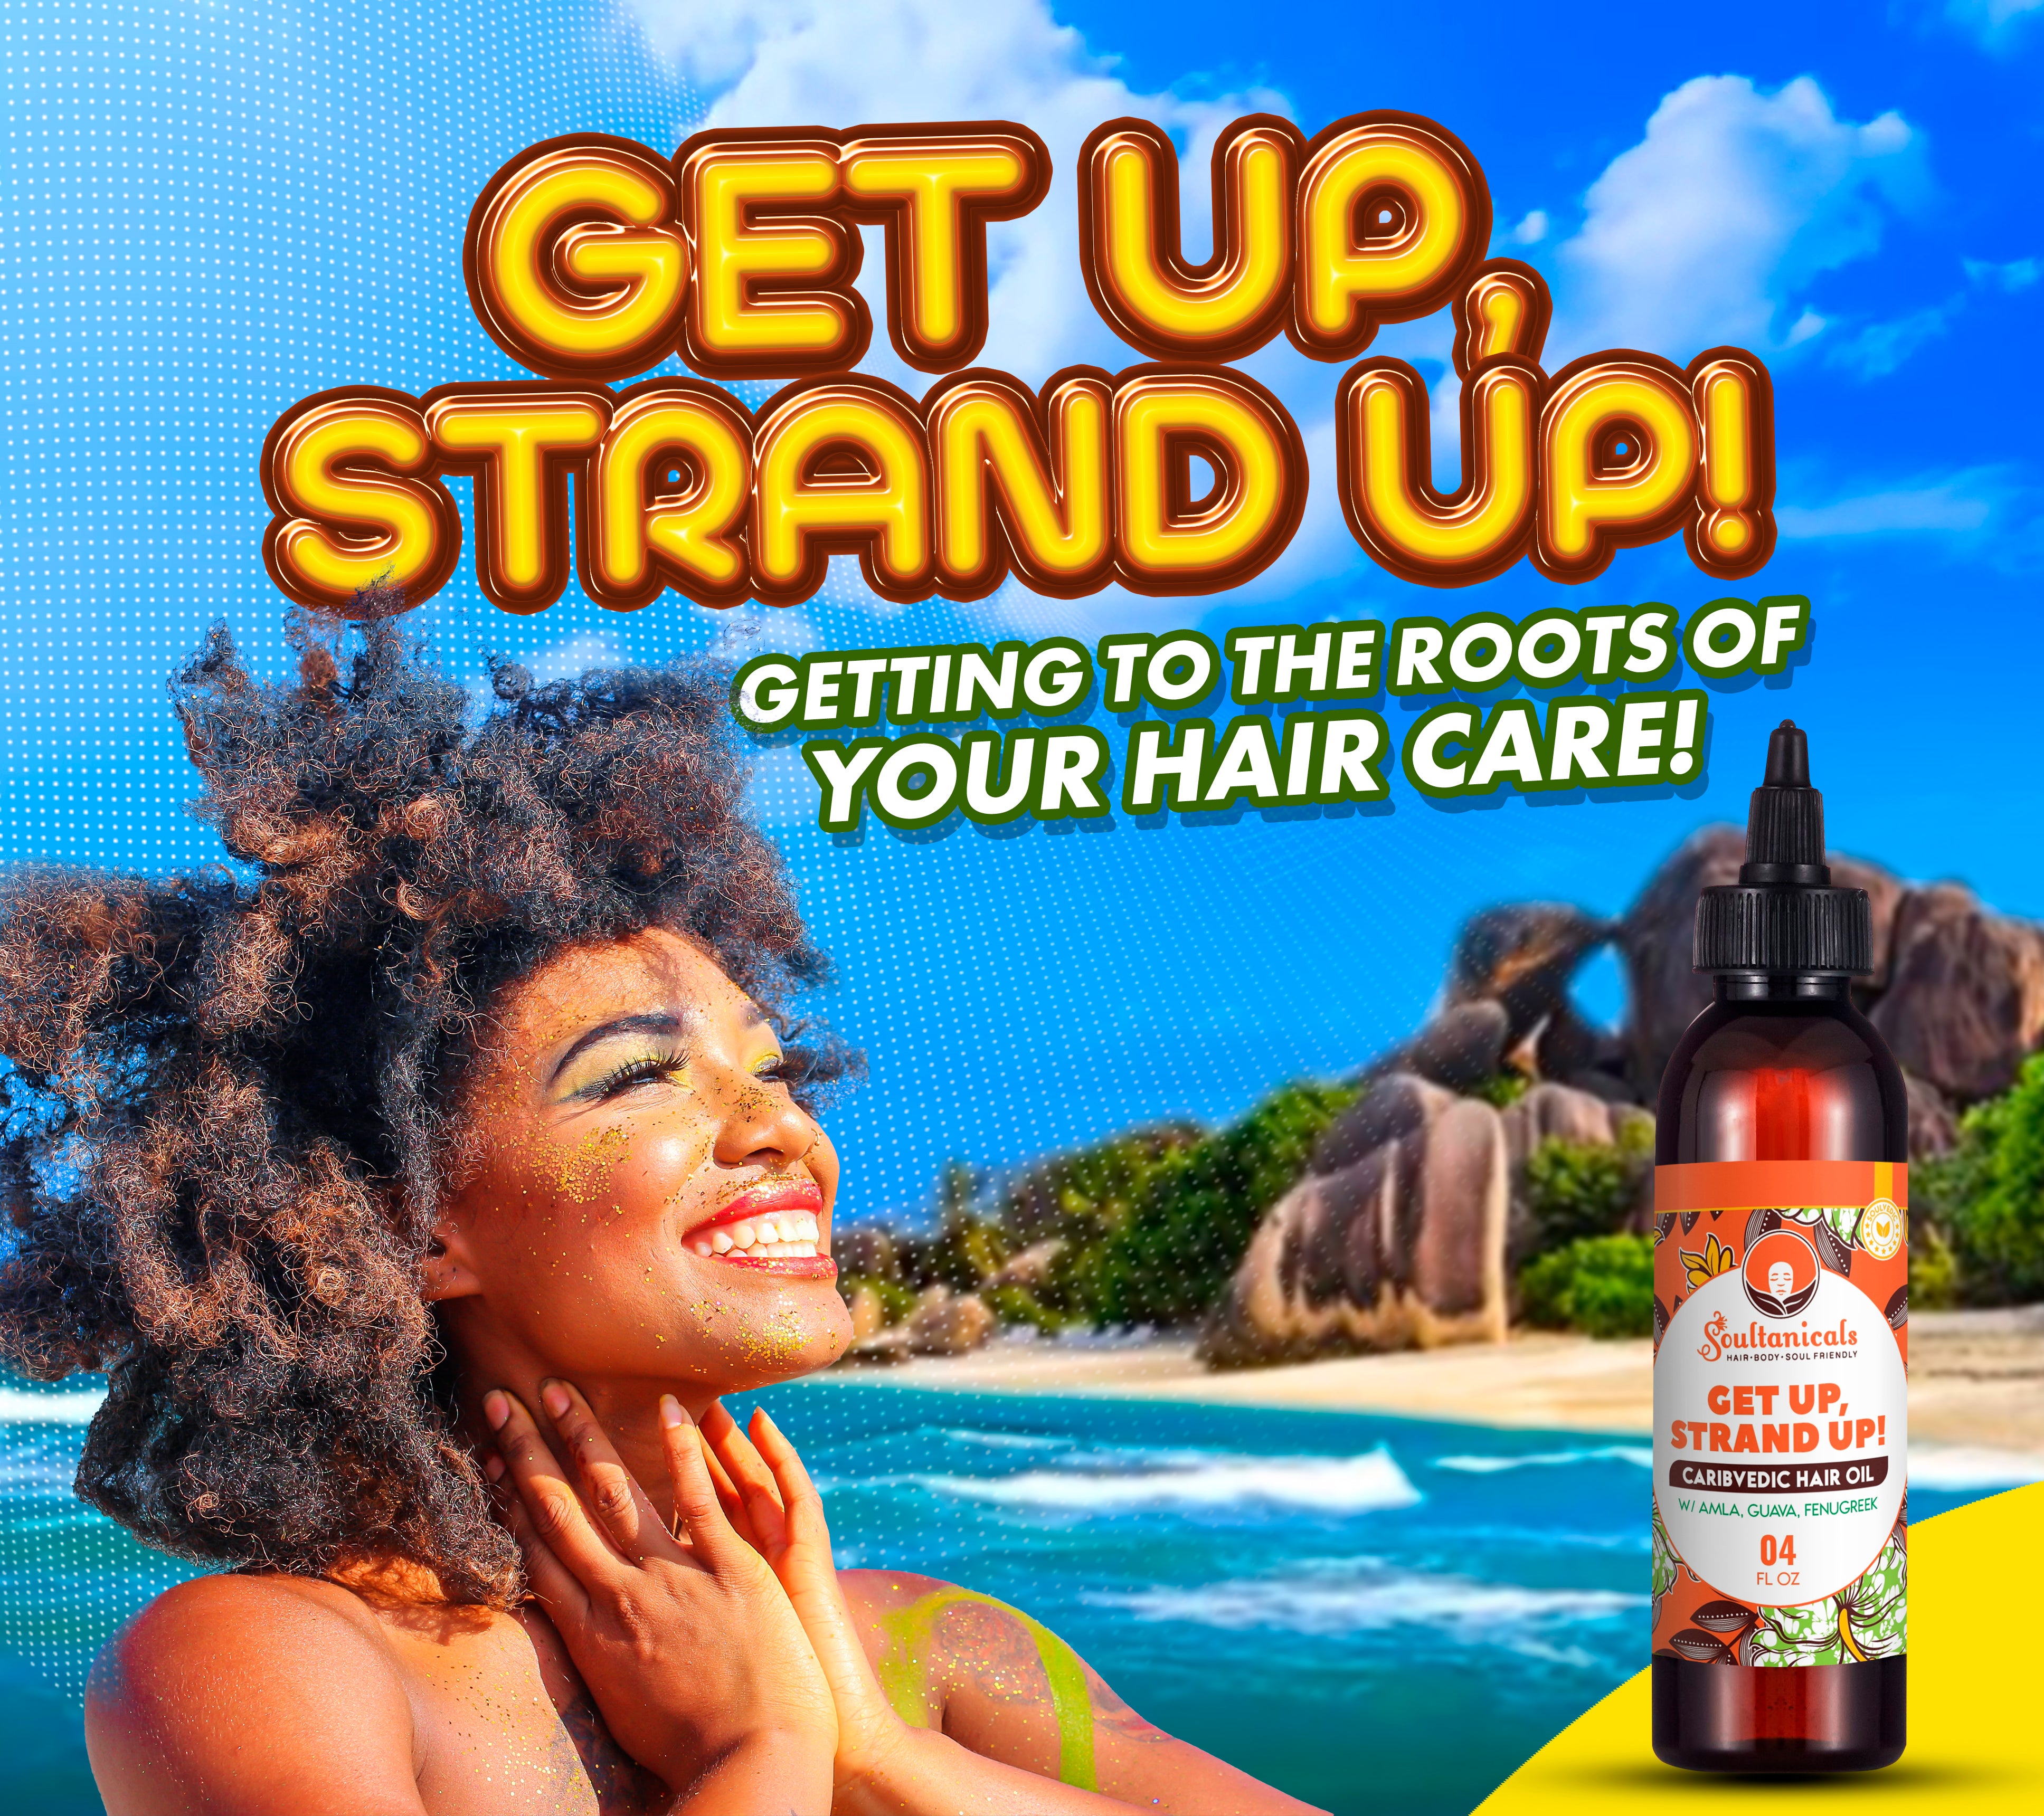 Get Up, Strand Up! Caribvedic Hair Oil is